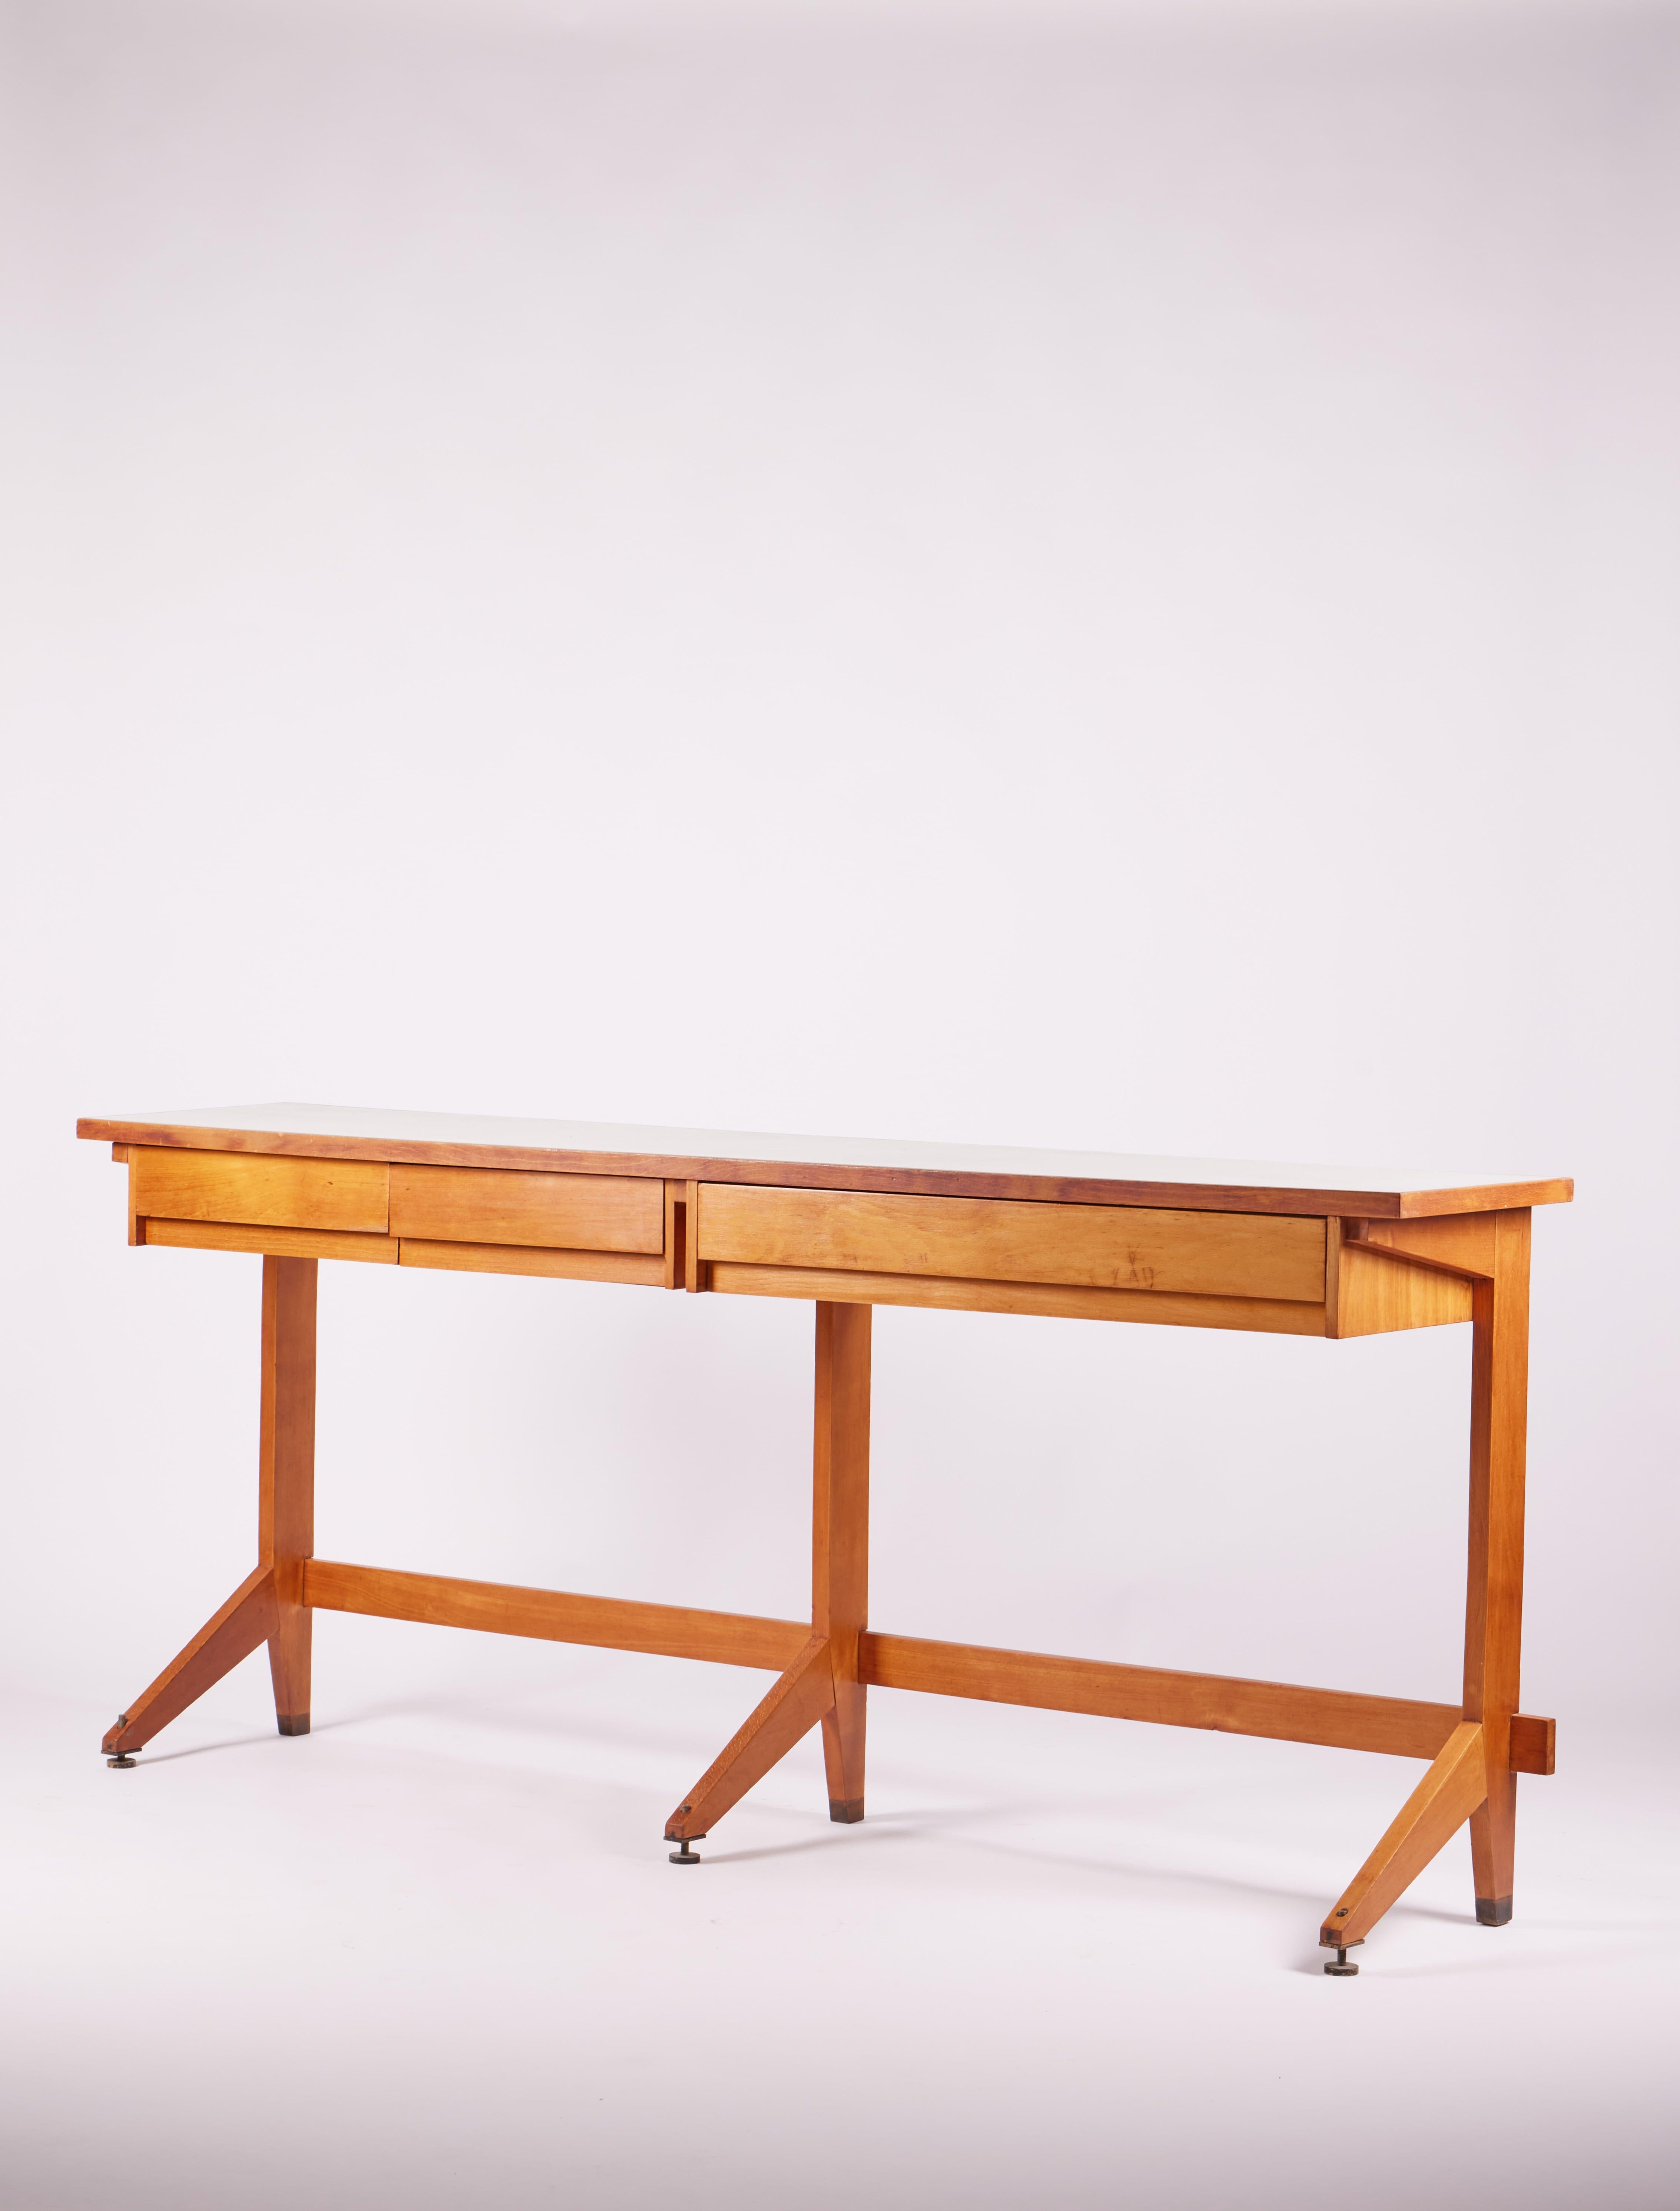 Ico Parisi, Italian midcentury long sideboard in walnut with white top, circa 1950

Ico Parisi played a significant role in the mid-20th-century design scene. He had a diverse career that spanned architecture, interior design, and furniture design.